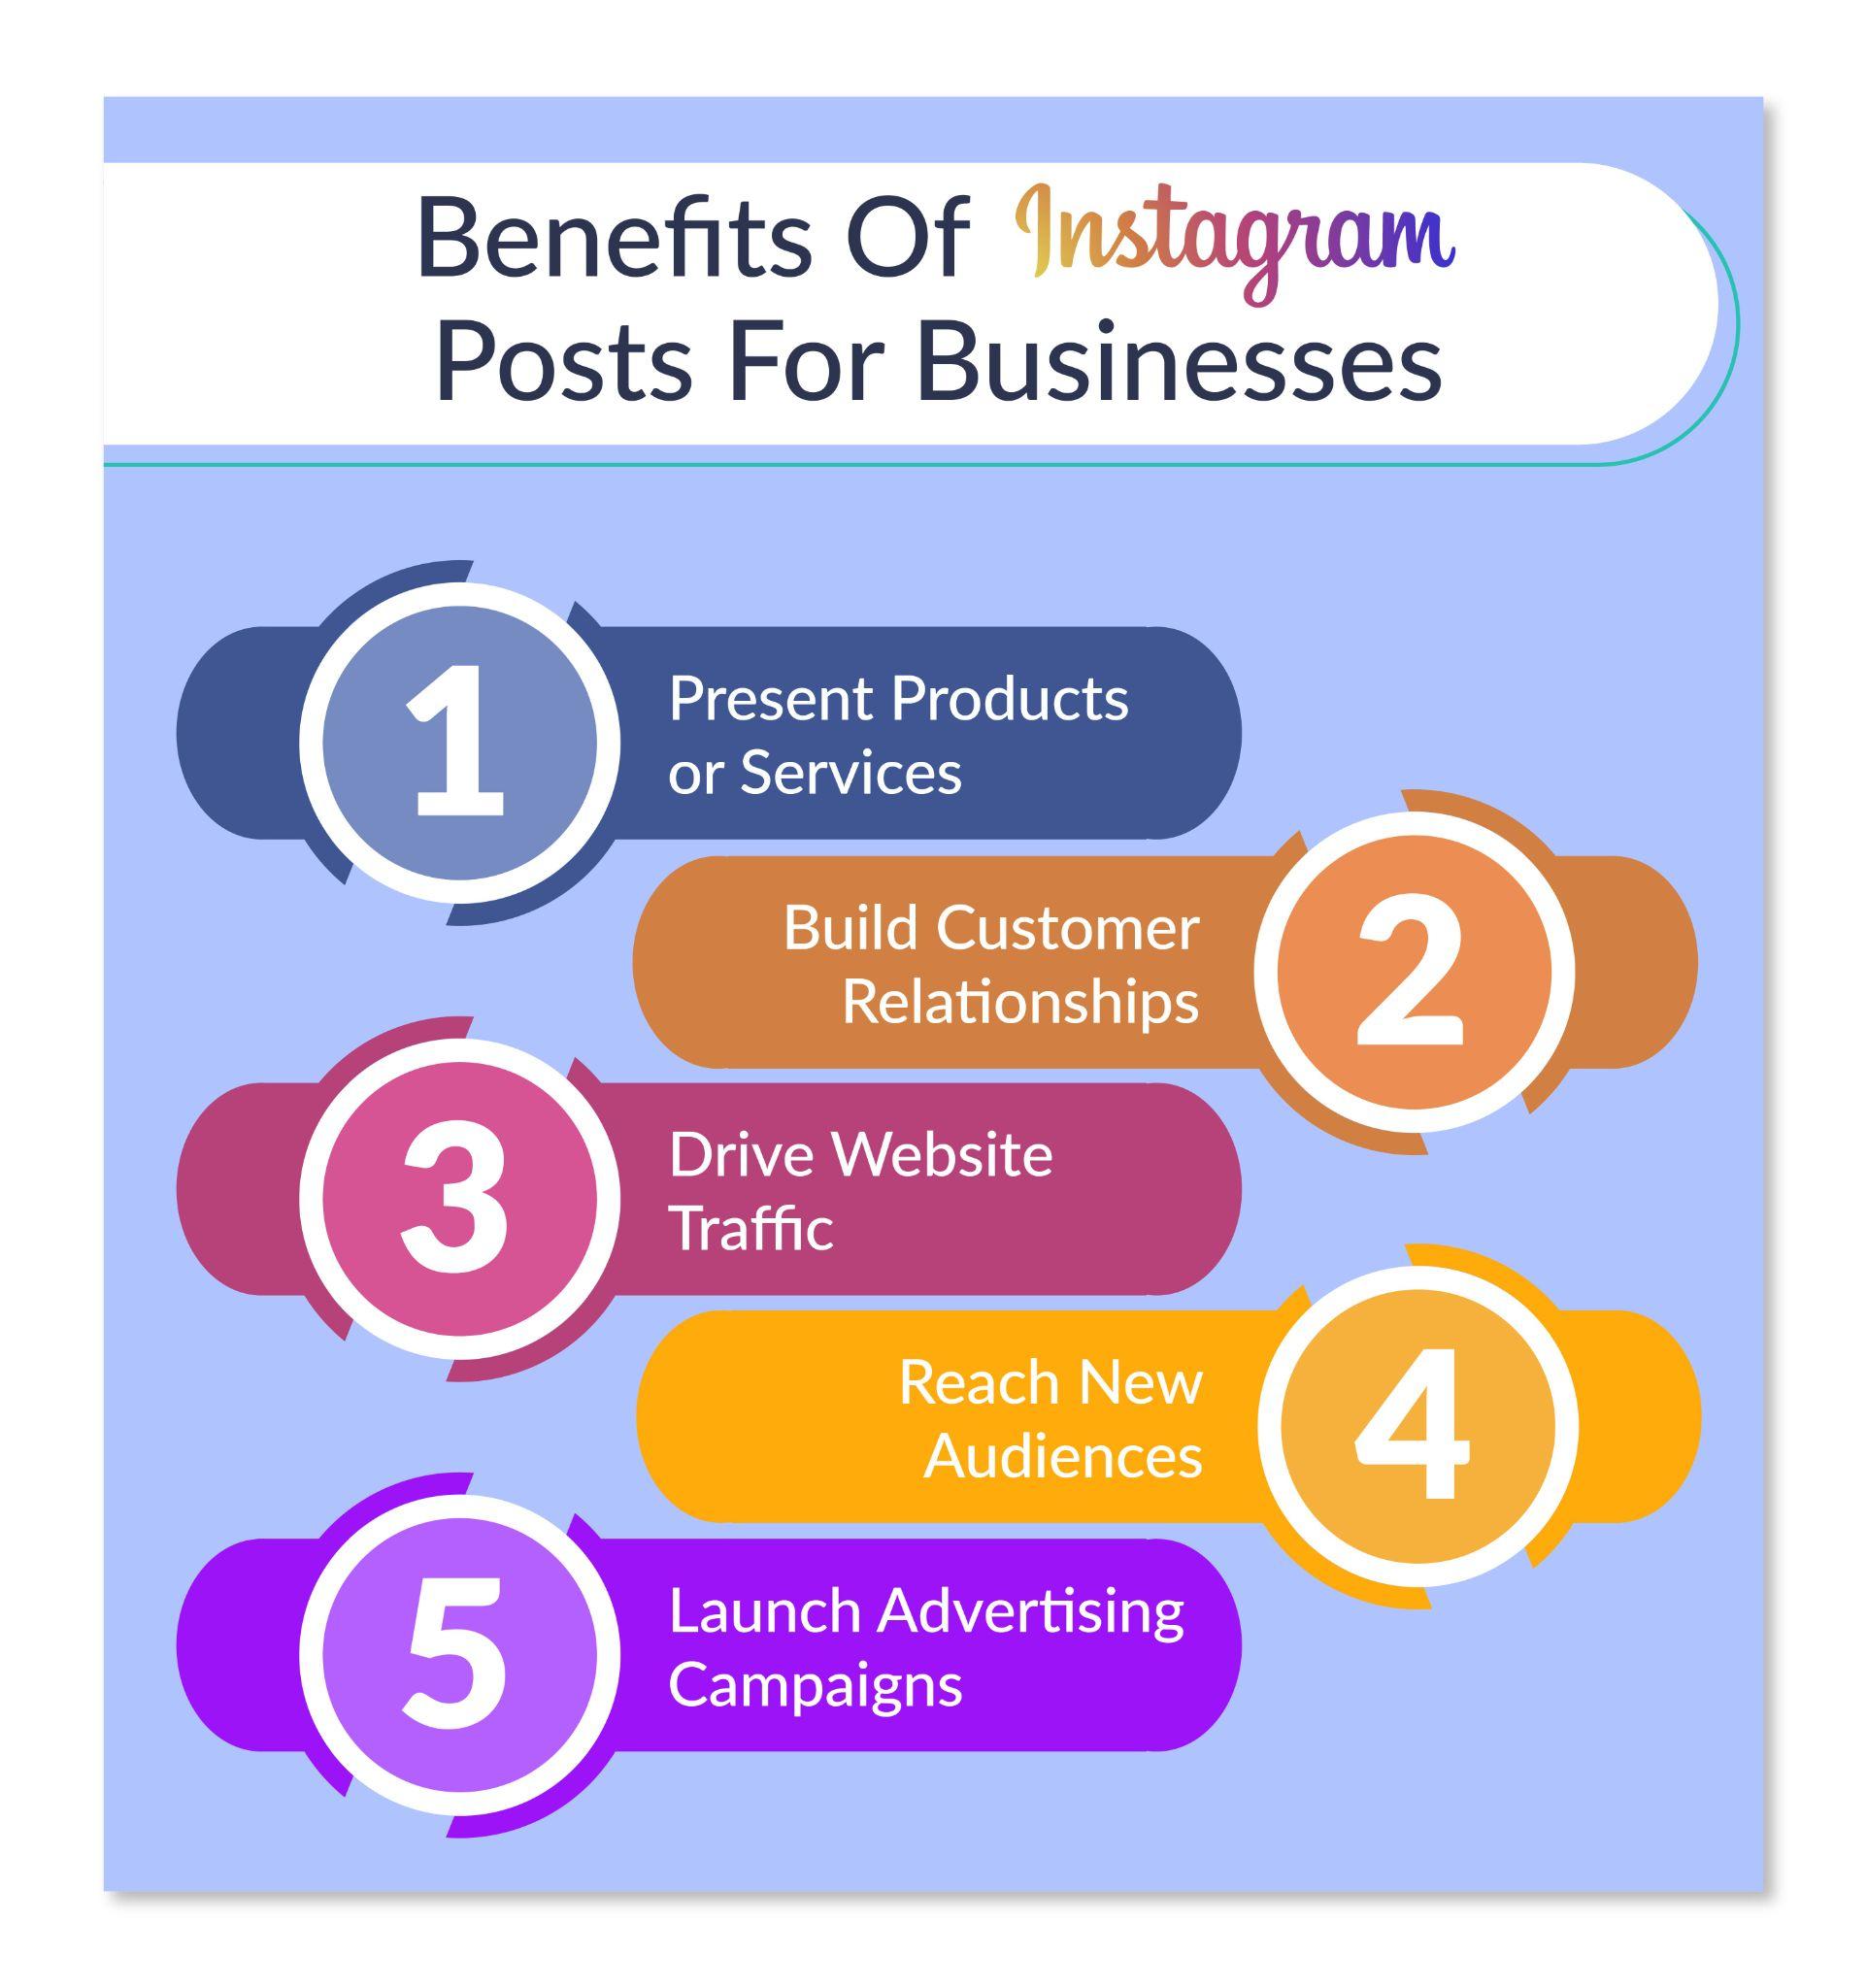 Benefits of Instagram posts for businesses